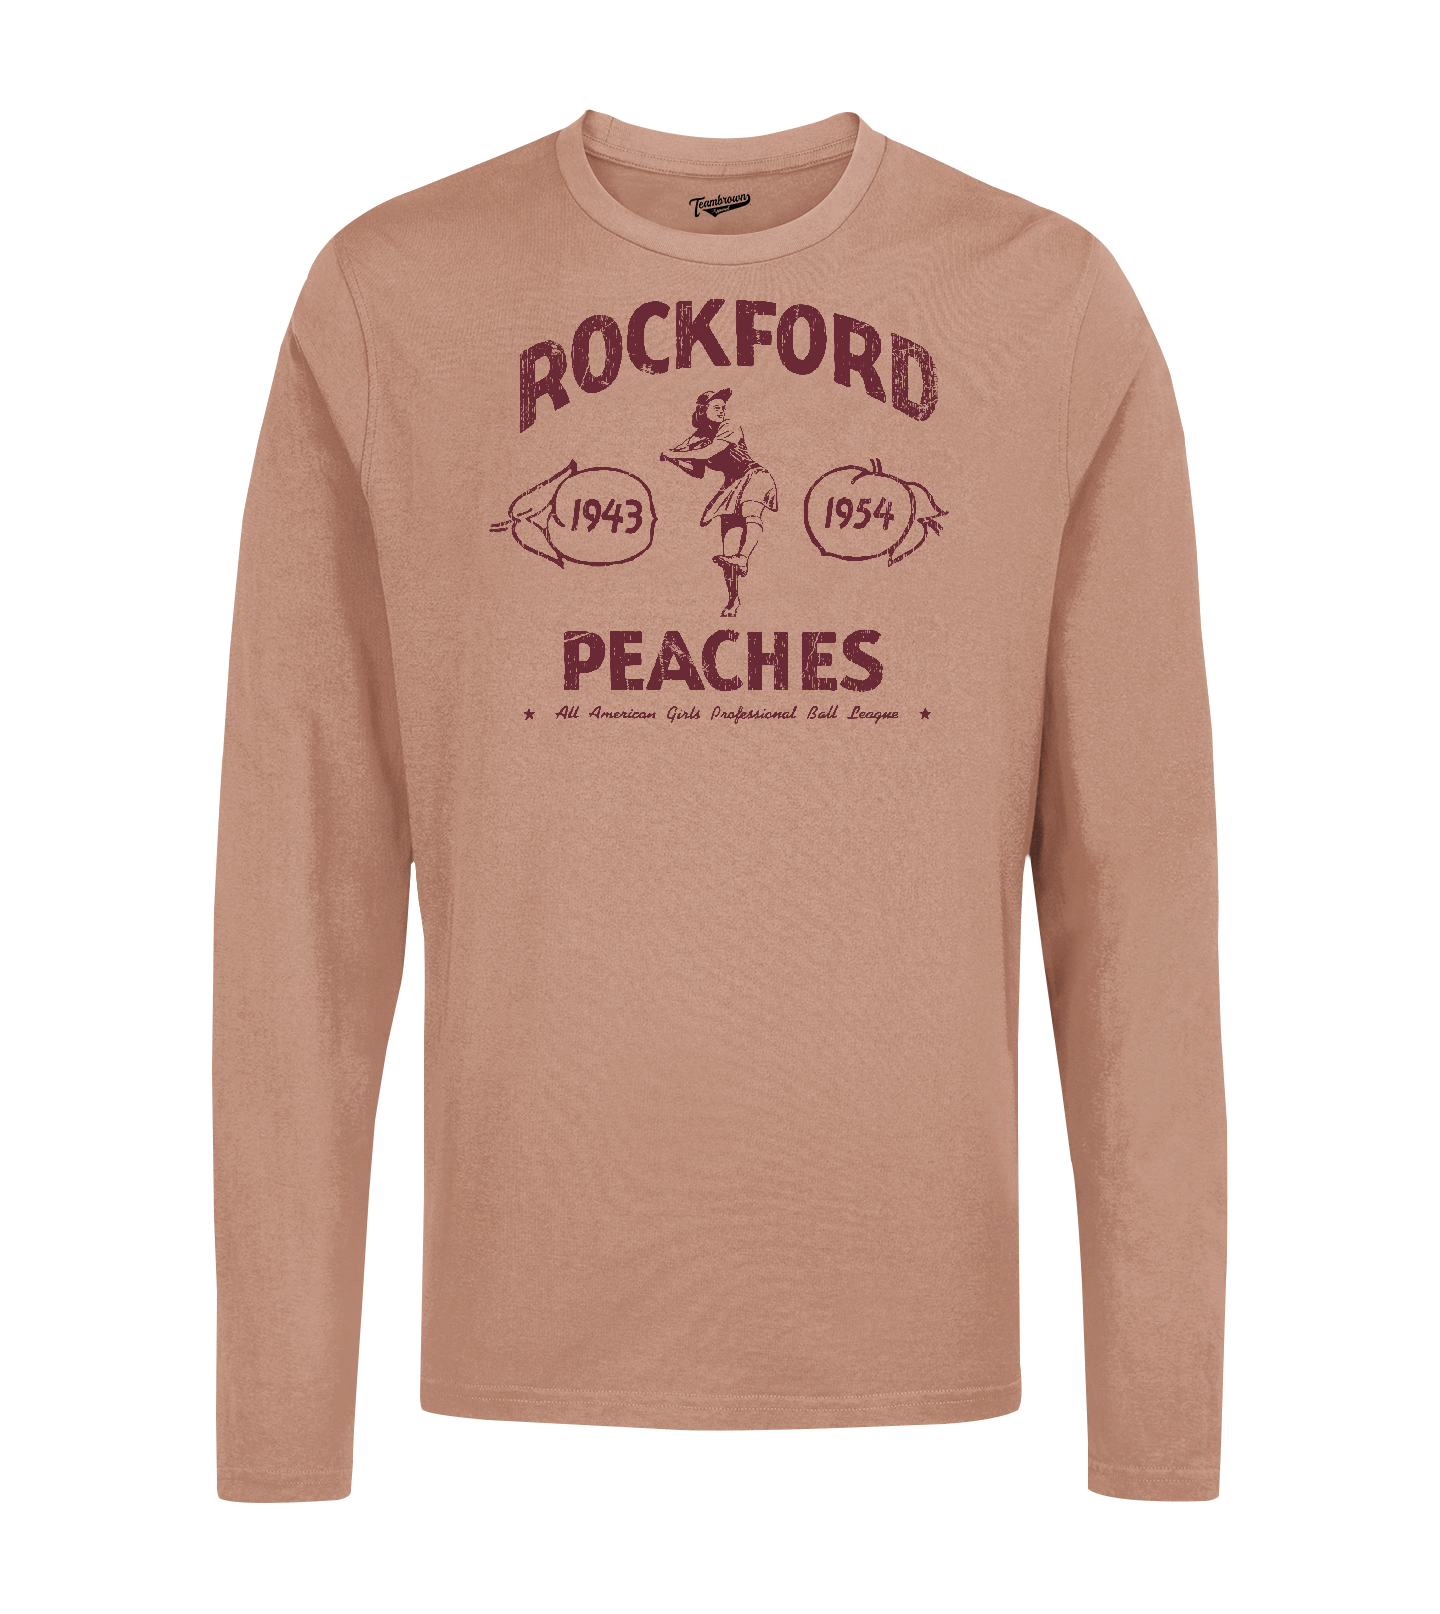 Rockford Peaches Program - Unisex Long Sleeve Crew T-Shirt | Officially Licensed - AAGPBL